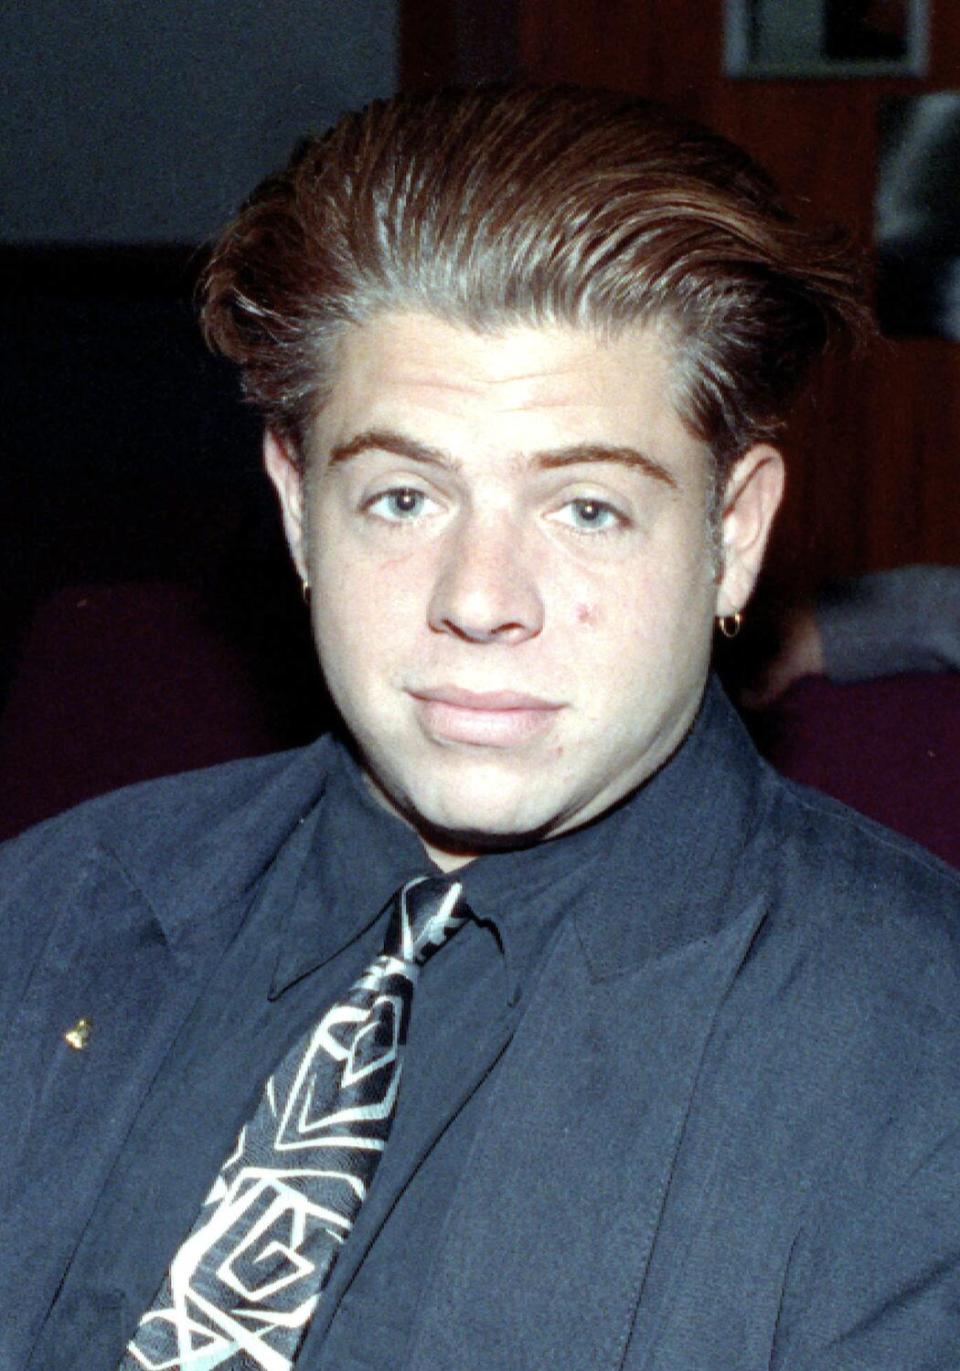 A man with slicked back brown hair and blue eyes wearing a collared shirt and a patterned necktie